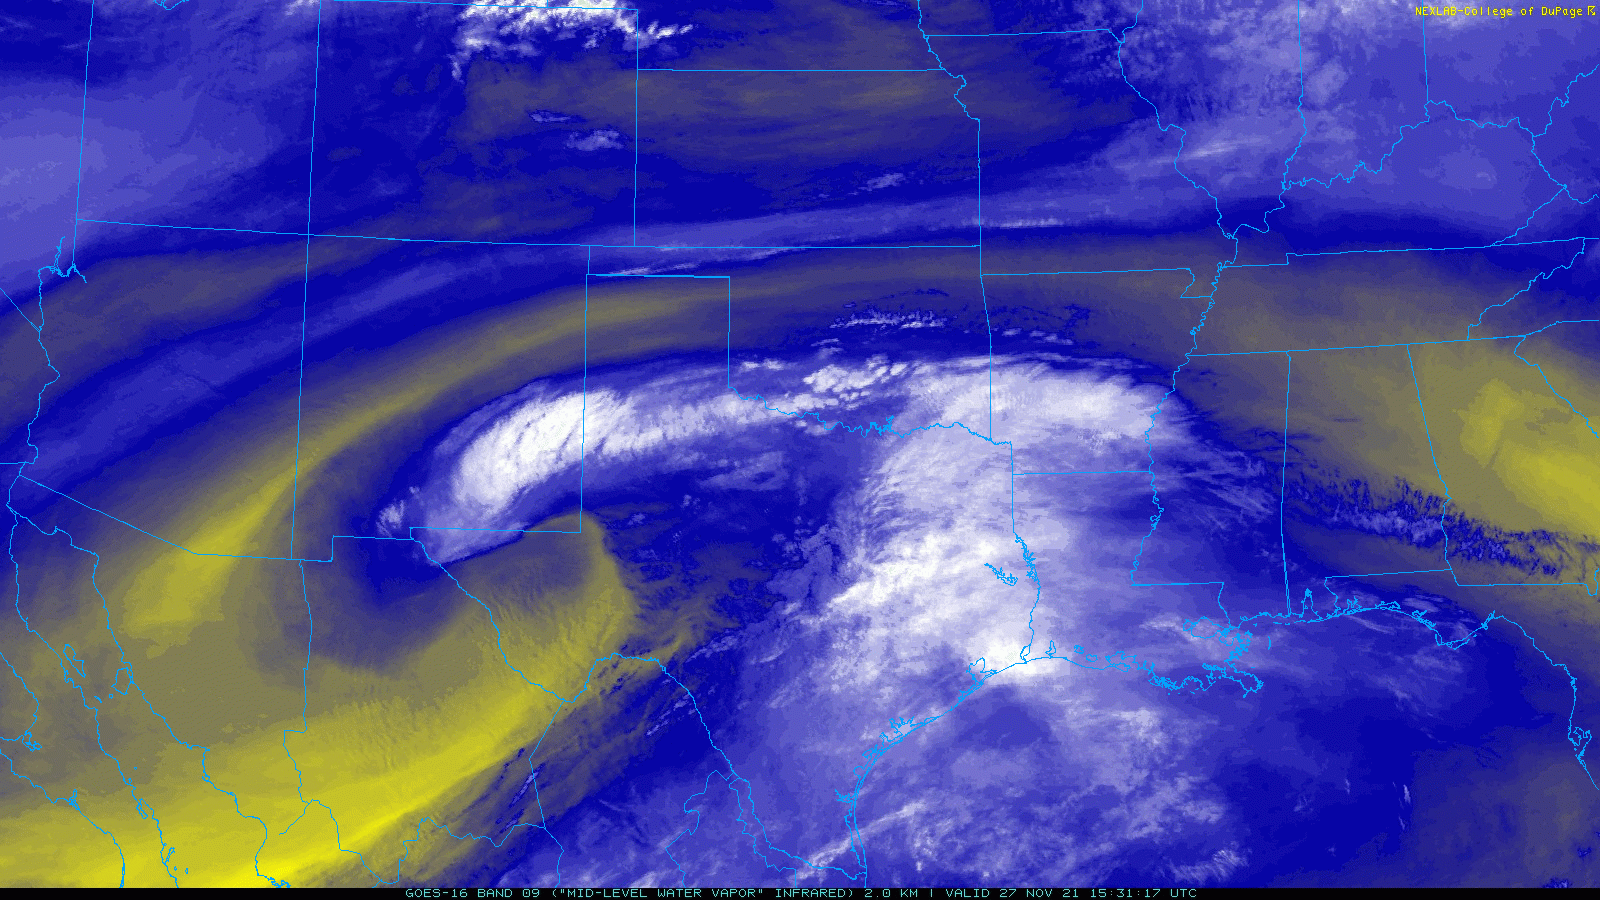 Water vapor loop valid from 9:31 am to 11:21 am on 27 November 2021.